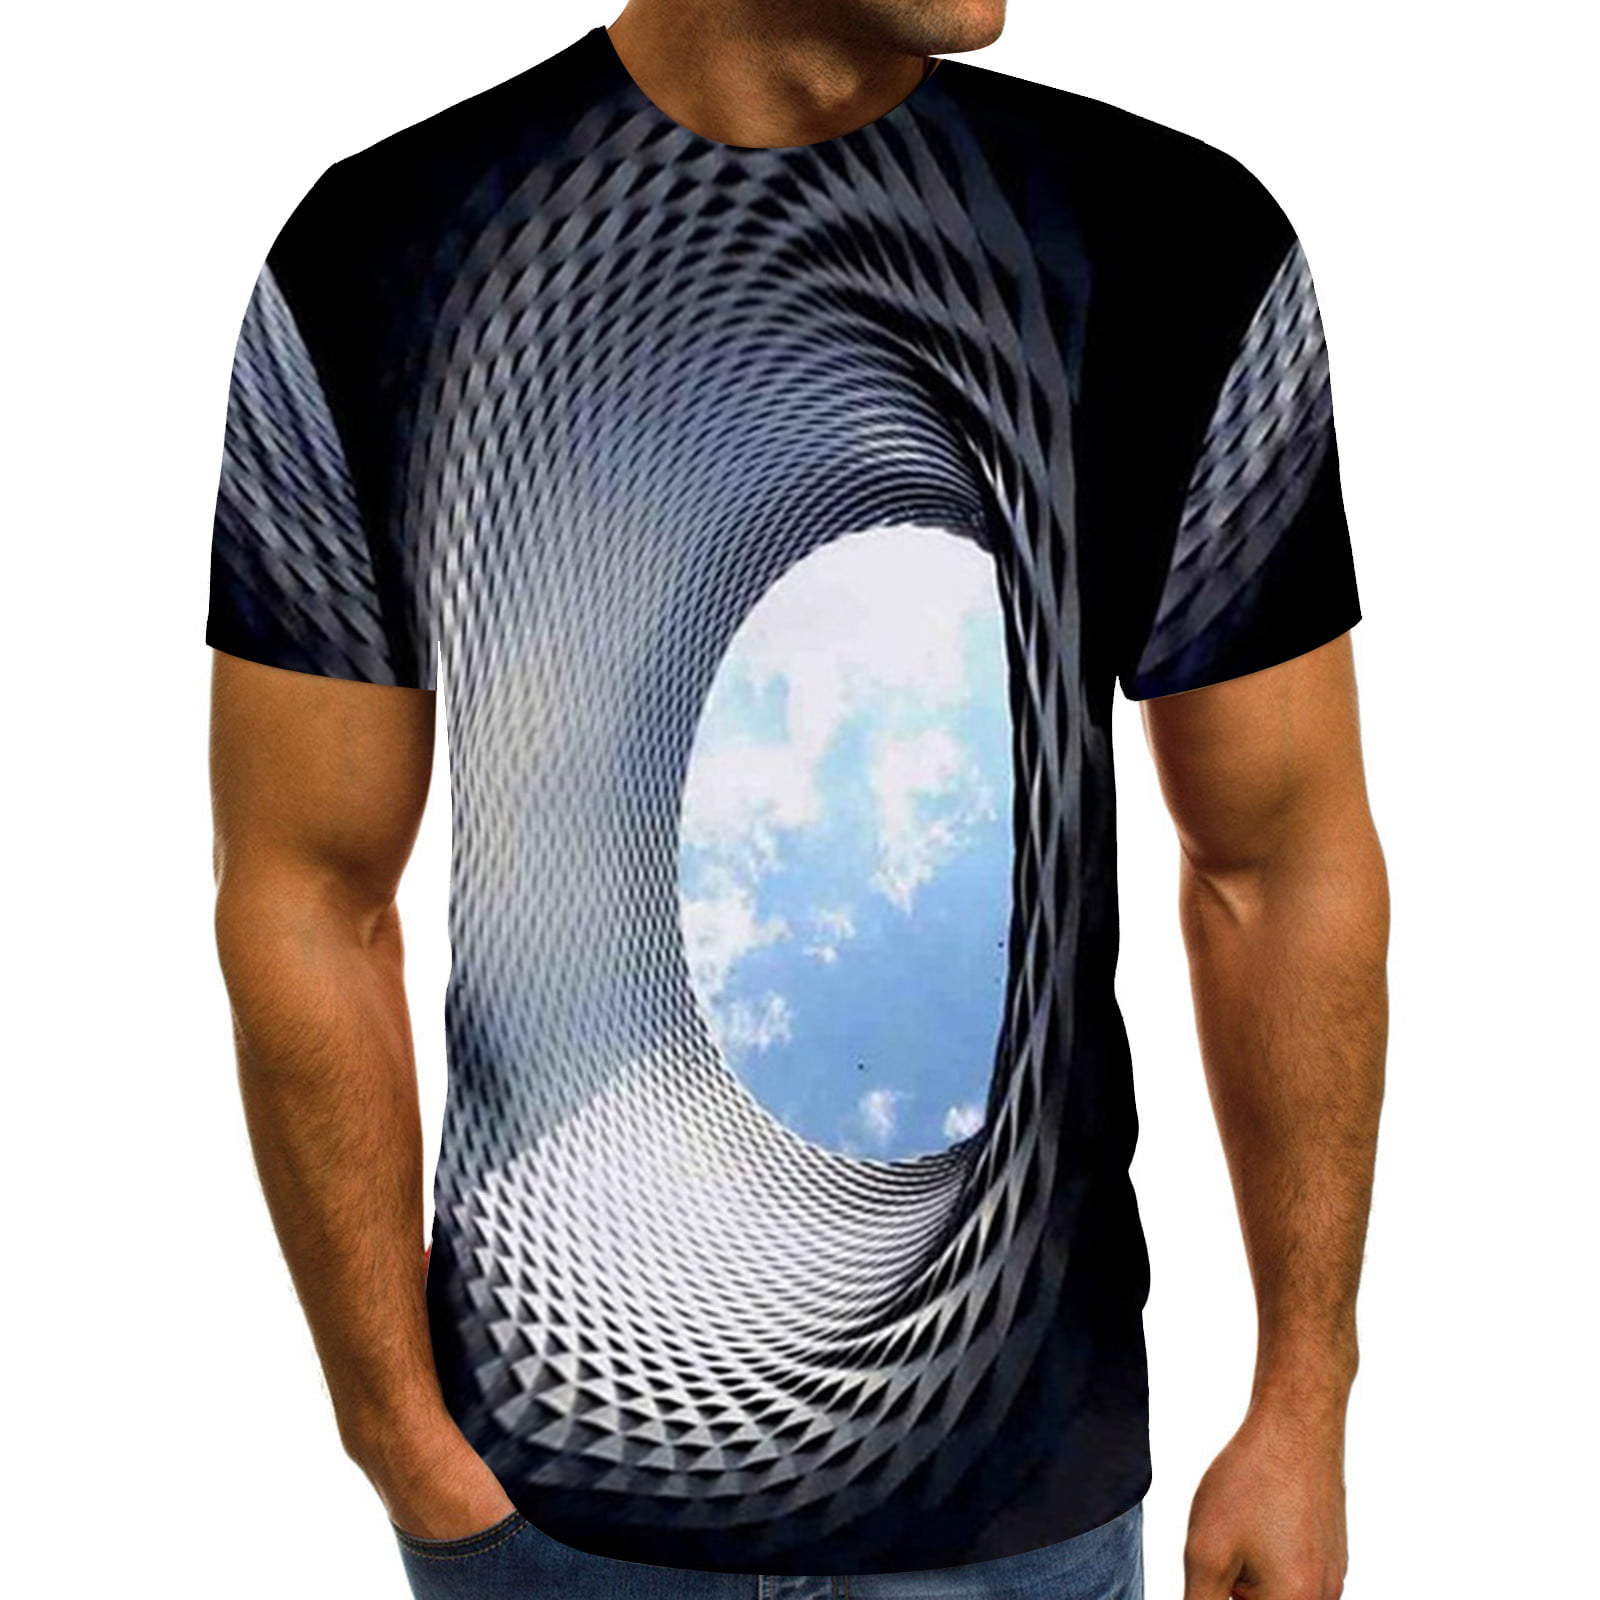 Casual 3D Printed T-Shirt Polyester Short Sleeve Tops for Men